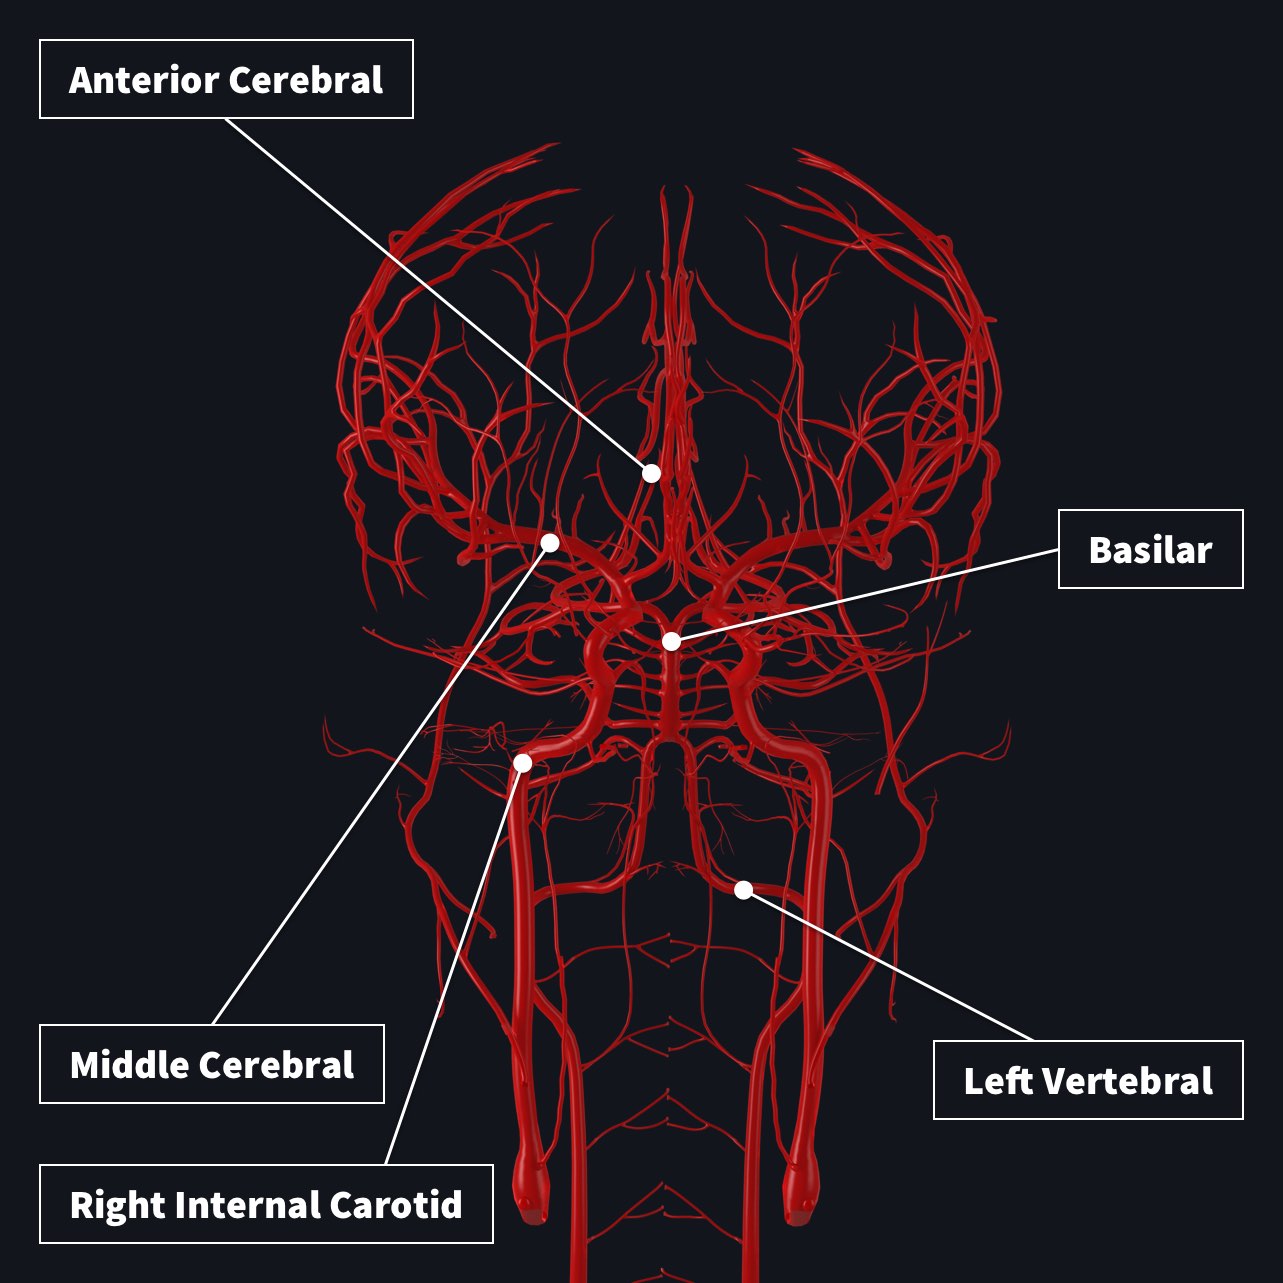 Blood supply to the brain with anterior cerebral artery, basilar artery, middle cerebral artery, left vertebral artery and right internal carotid artery highlighted